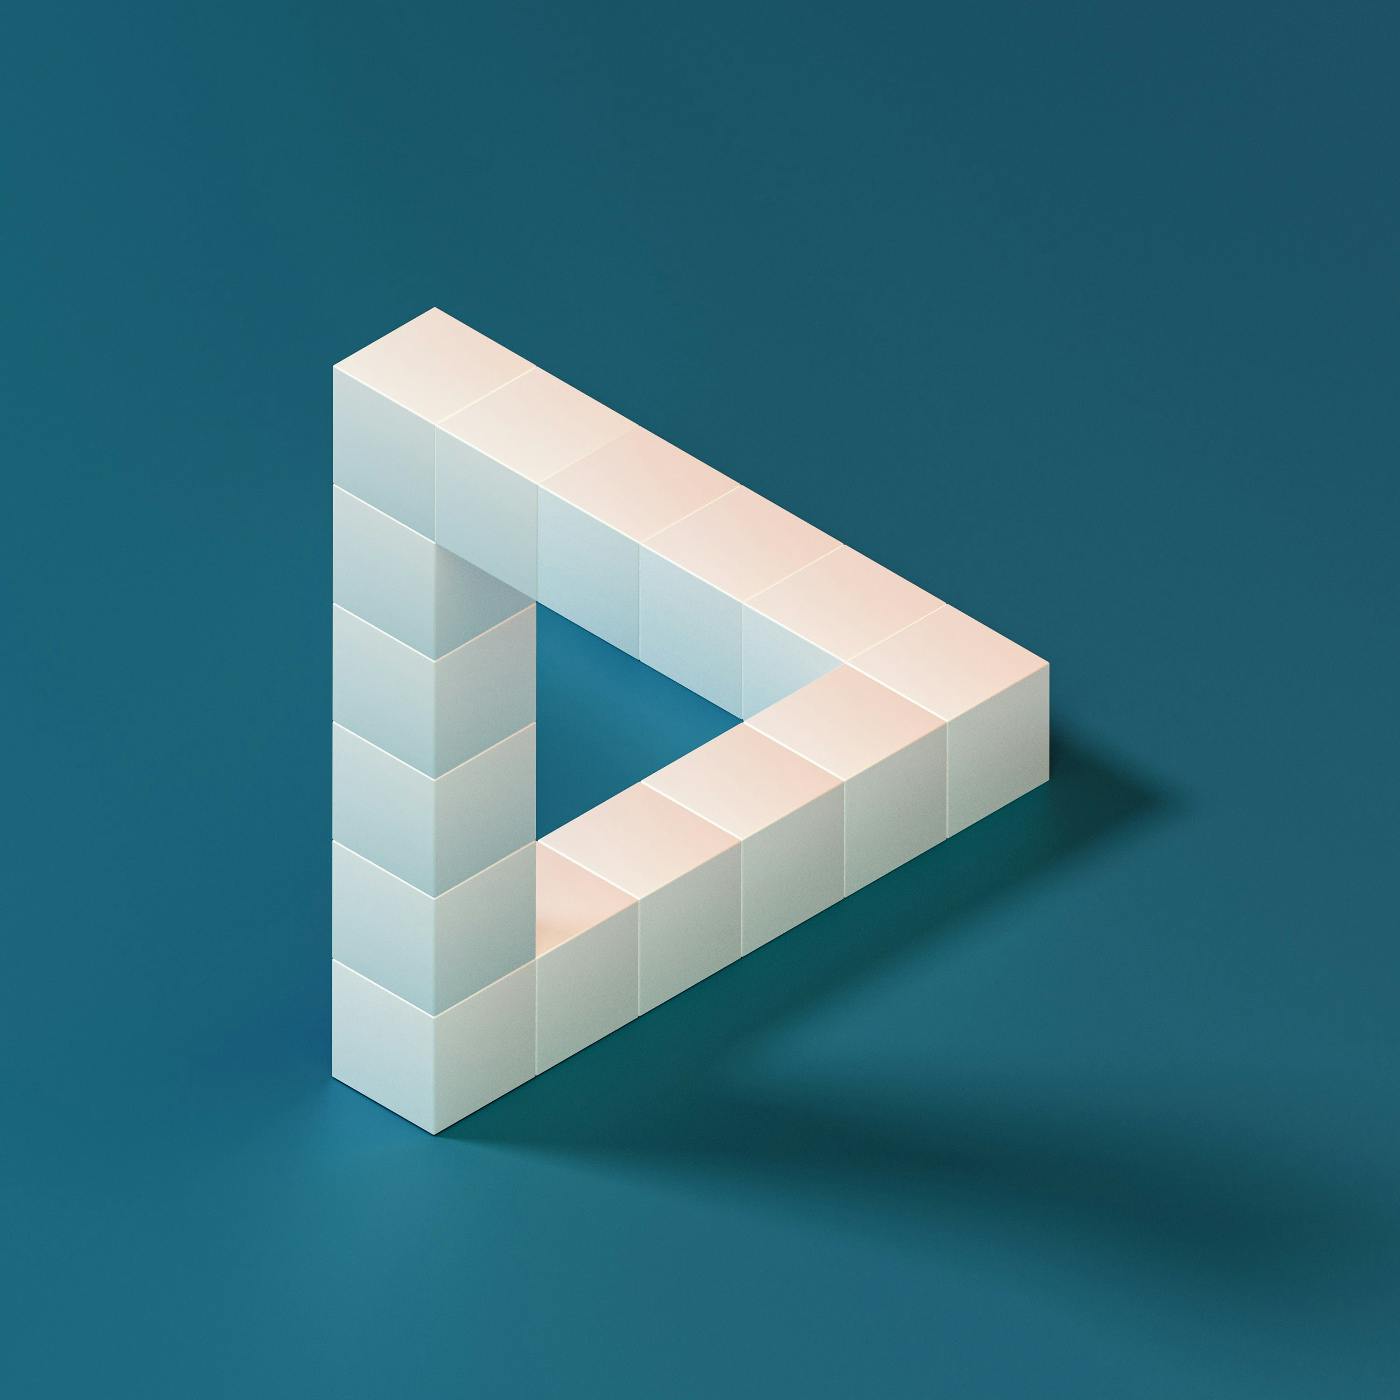 cubes forming and optical illusion of a triangle